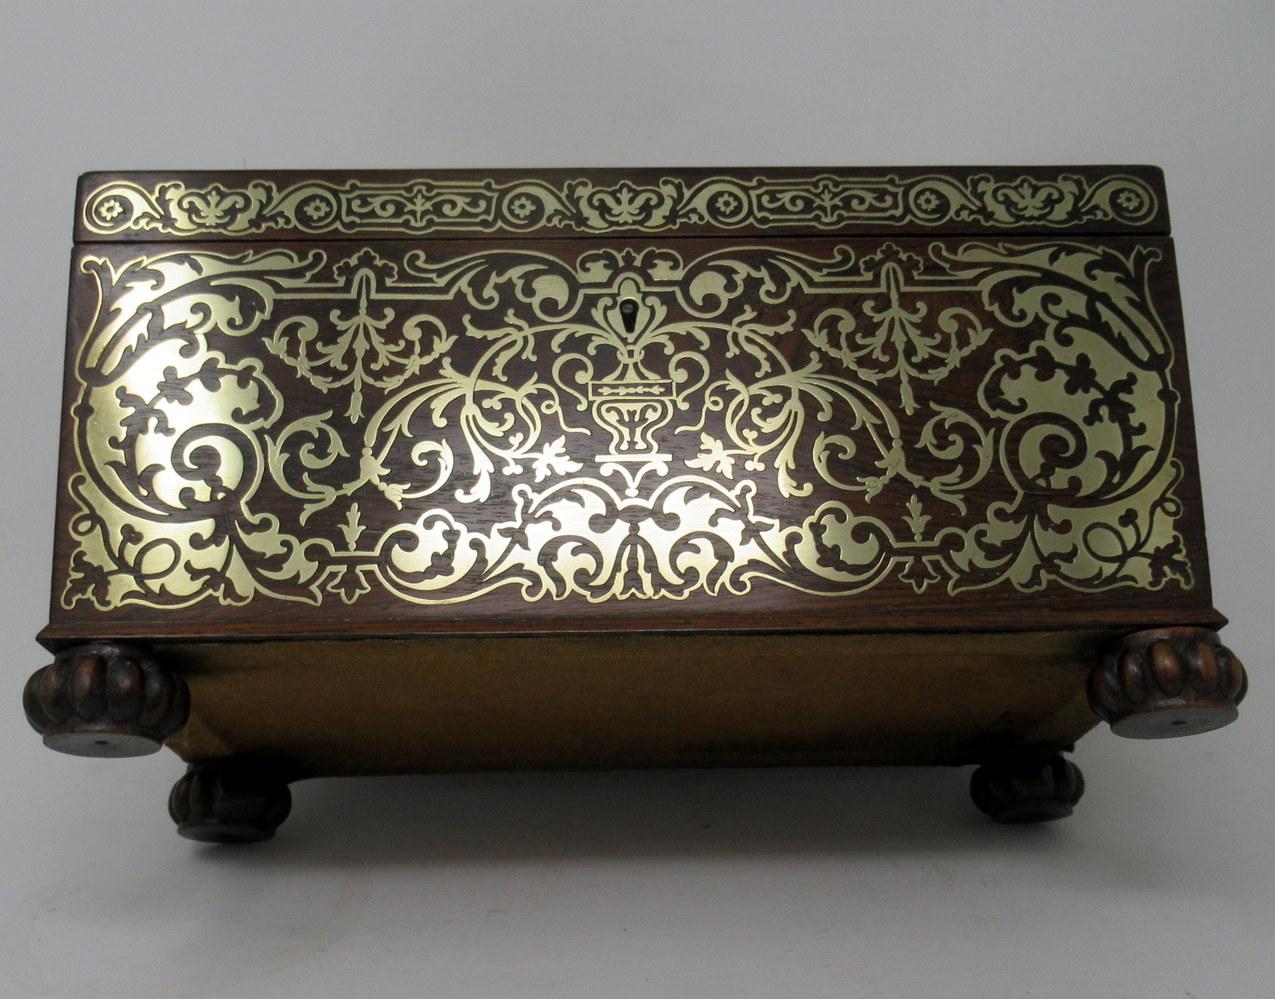 Antique Brass Inlaid Mahogany English Tea Caddy Box Regency Gillows Lancaster For Sale 5